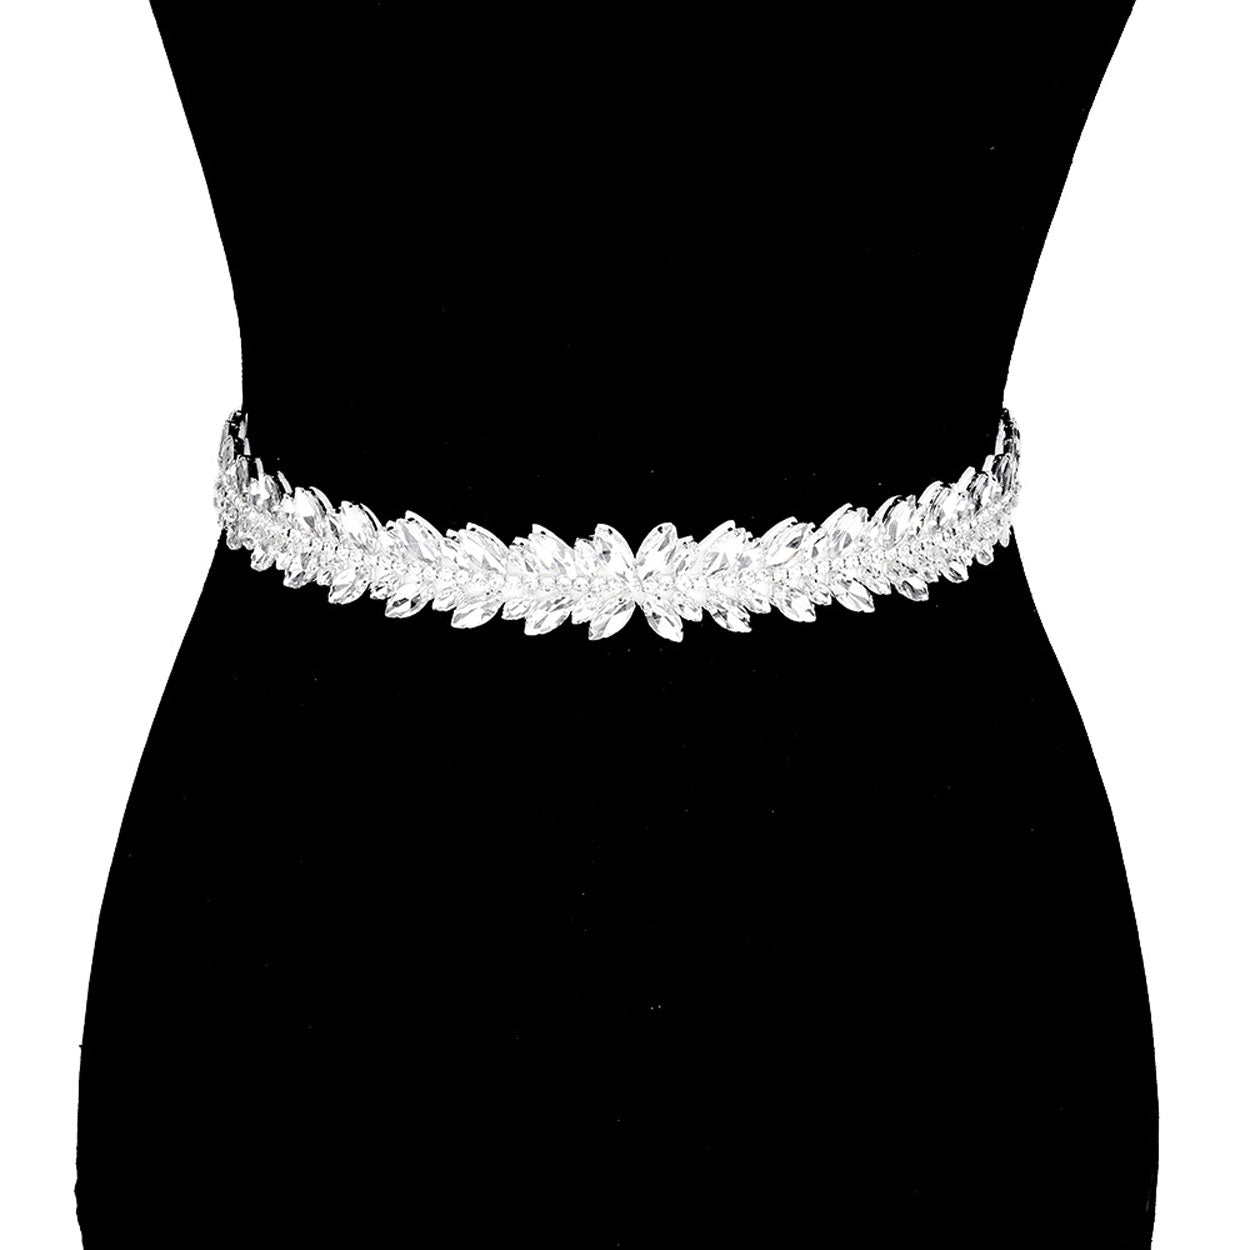 Clear Silver White Crystal Sash Ribbon Bridal Wedding Belt Headband. These headband will make you feel extra glamorous. Push back your hair with this exquisite knotted headband, spice up any plain outfit! Be ready to receive compliments. Be the ultimate trendsetter wearing this chic headband with all your stylish outfits! Exquisite enough to use on your wedding day.